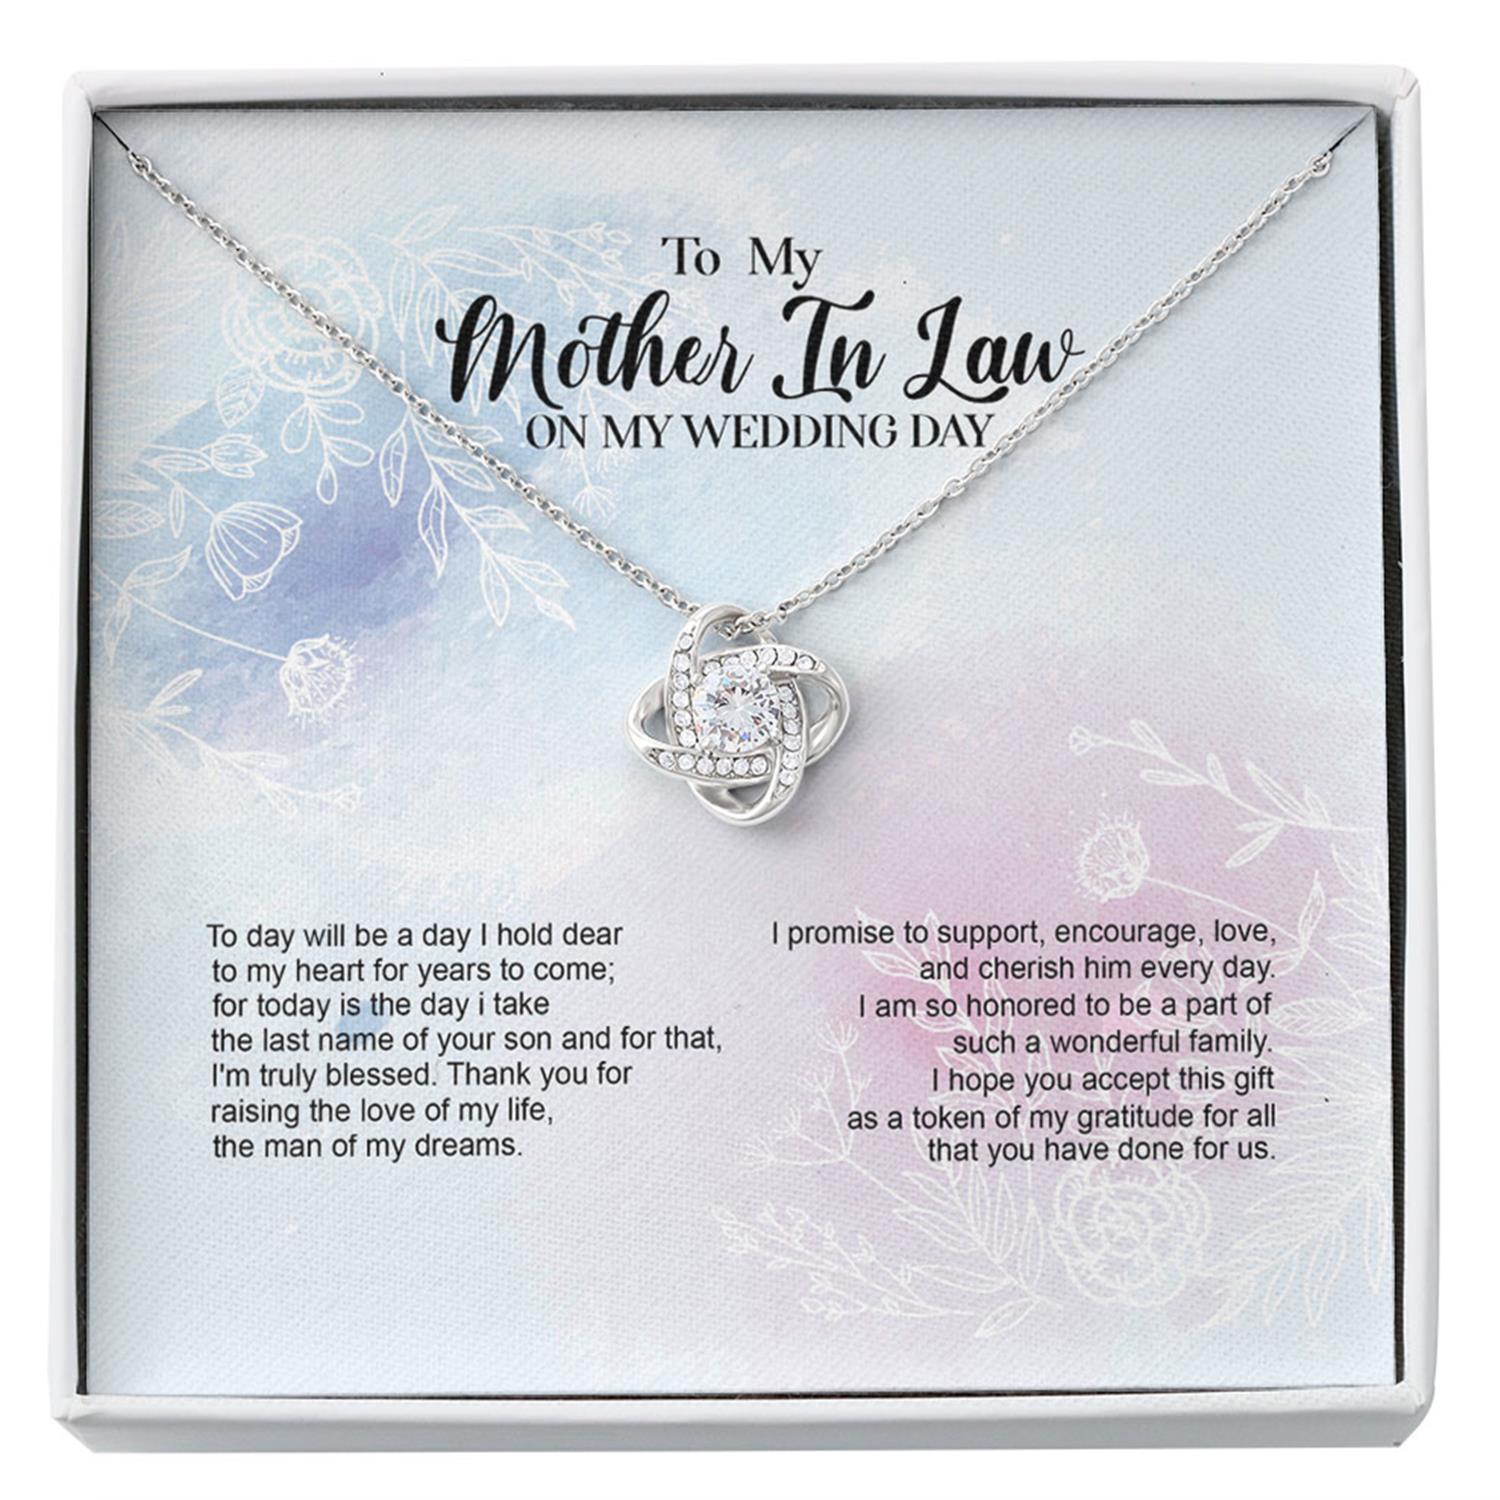 Mother Of The Groom Necklace Gift From Bride, Wedding Gift For Mother In Law, Bridal Party Gifts, Wedding Gift Custom Necklace